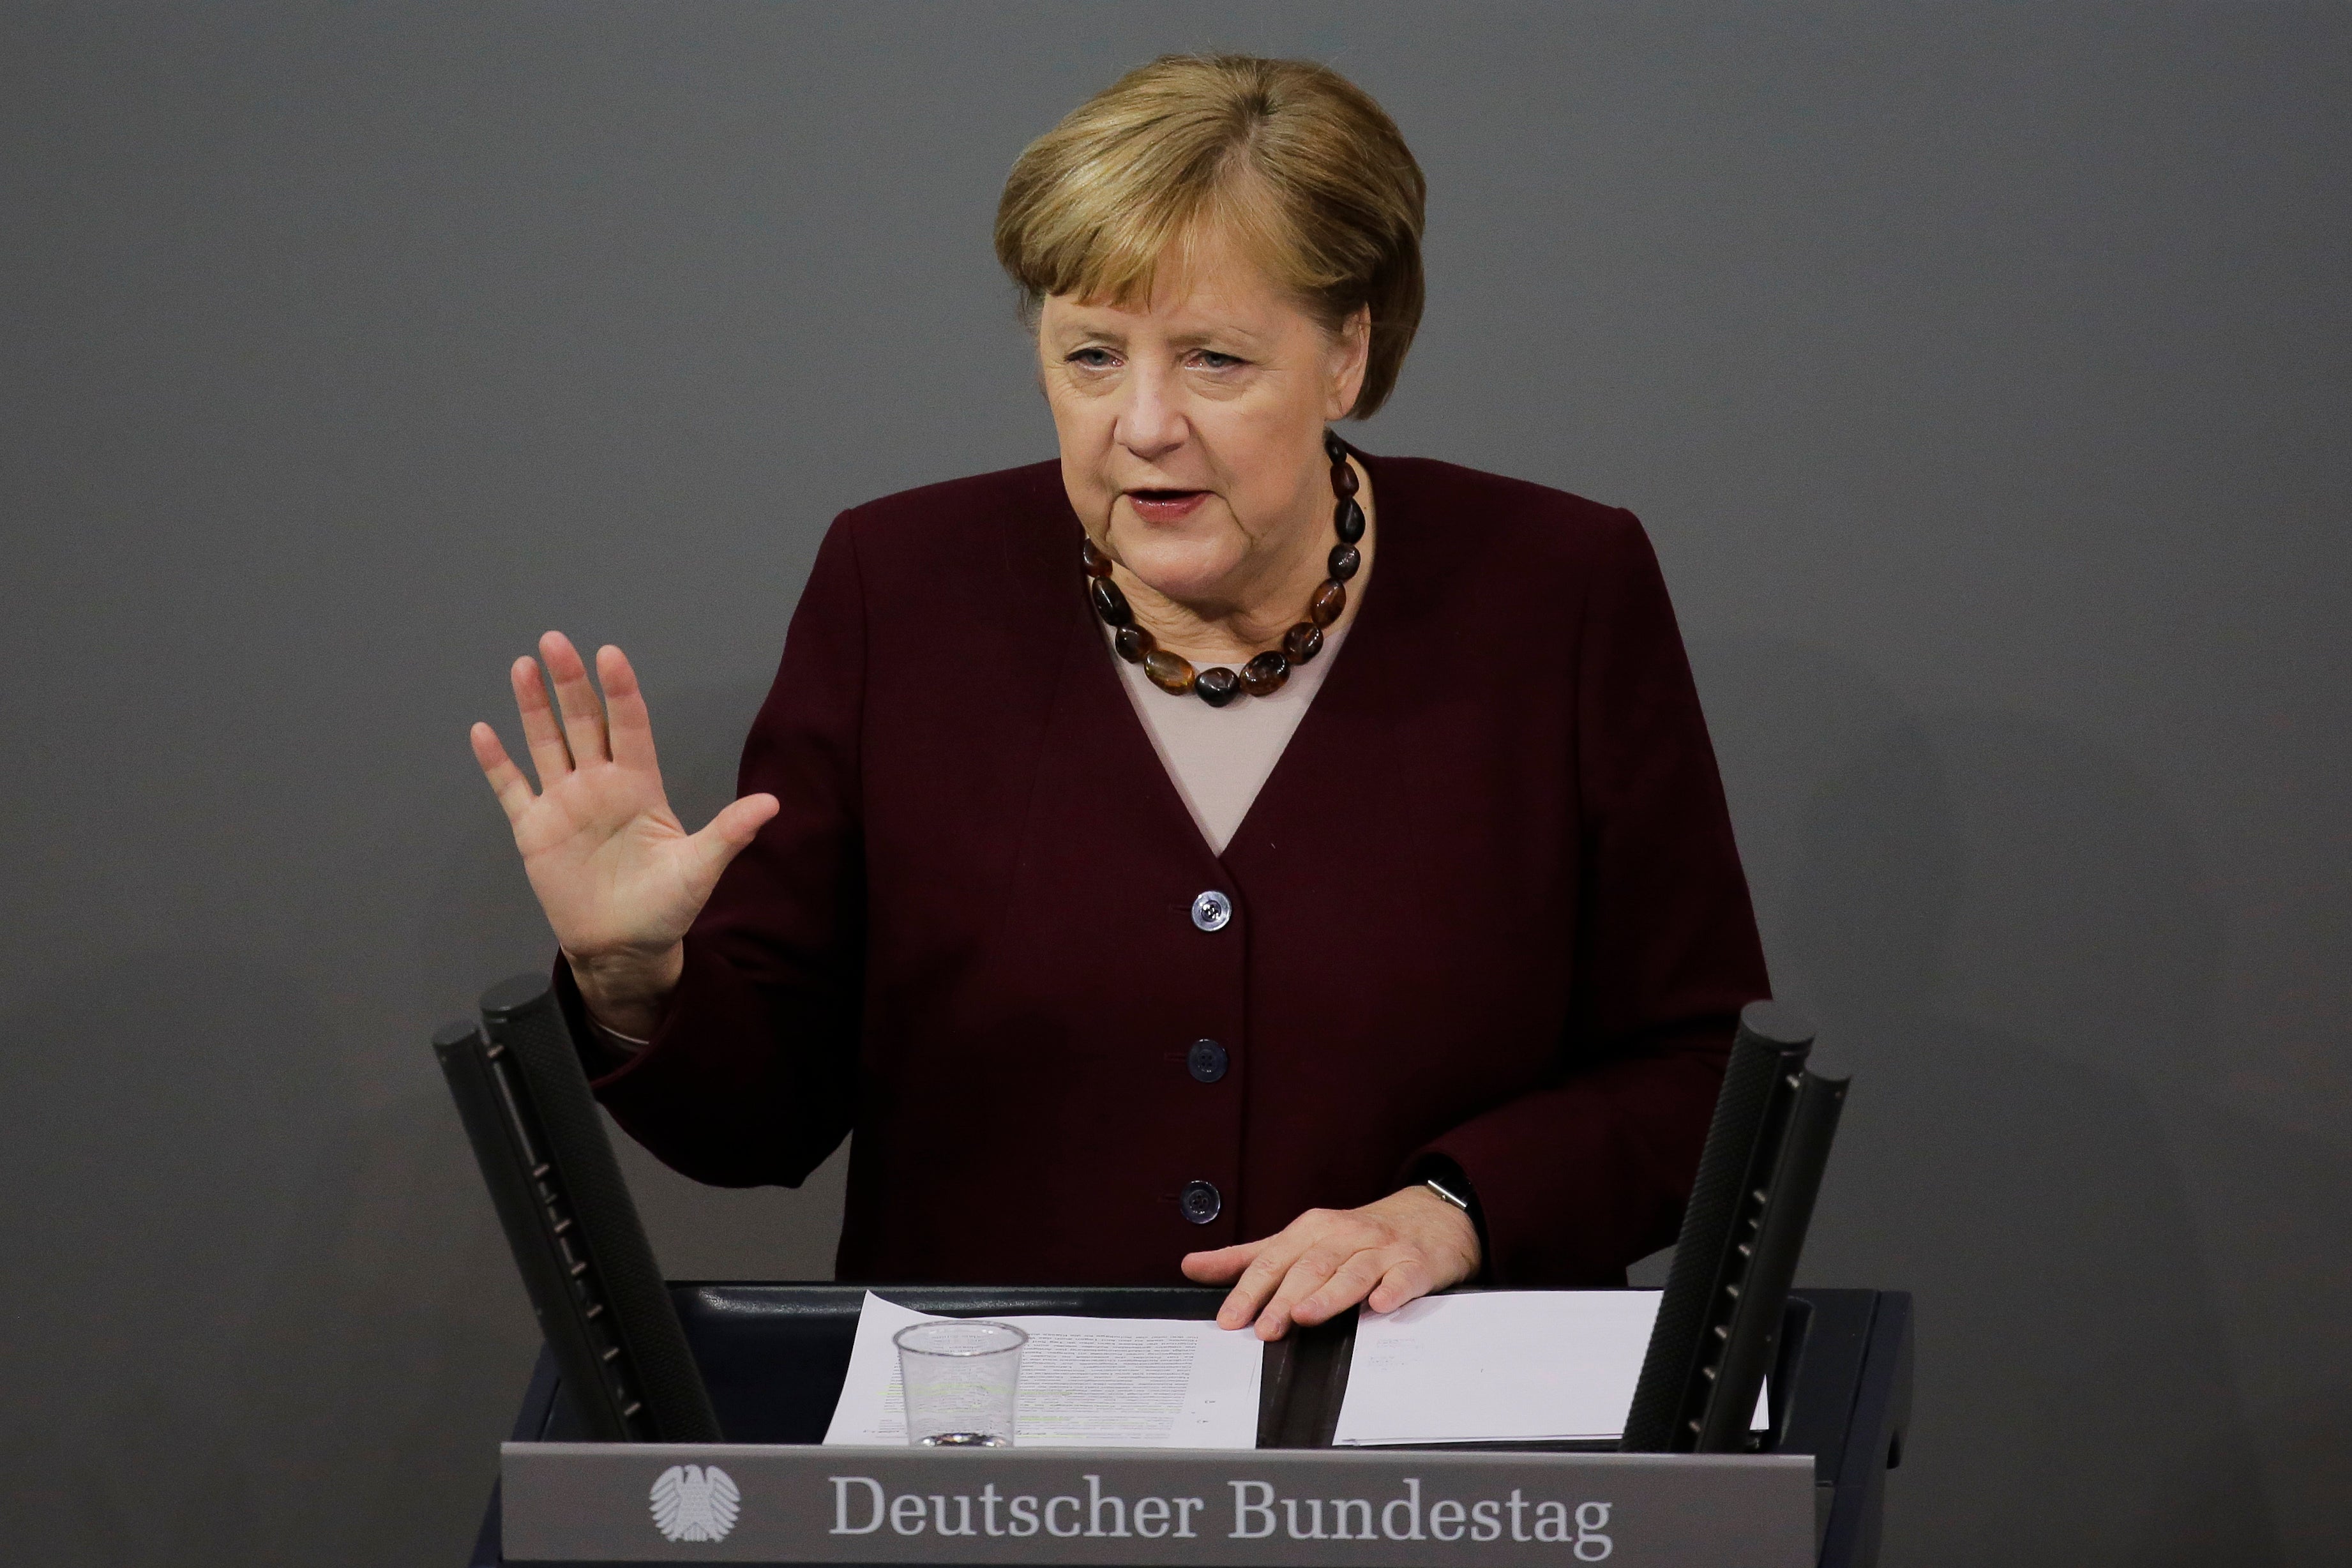 Angela Merkel is among leaders calling for the EU to stand by its mandate in talks